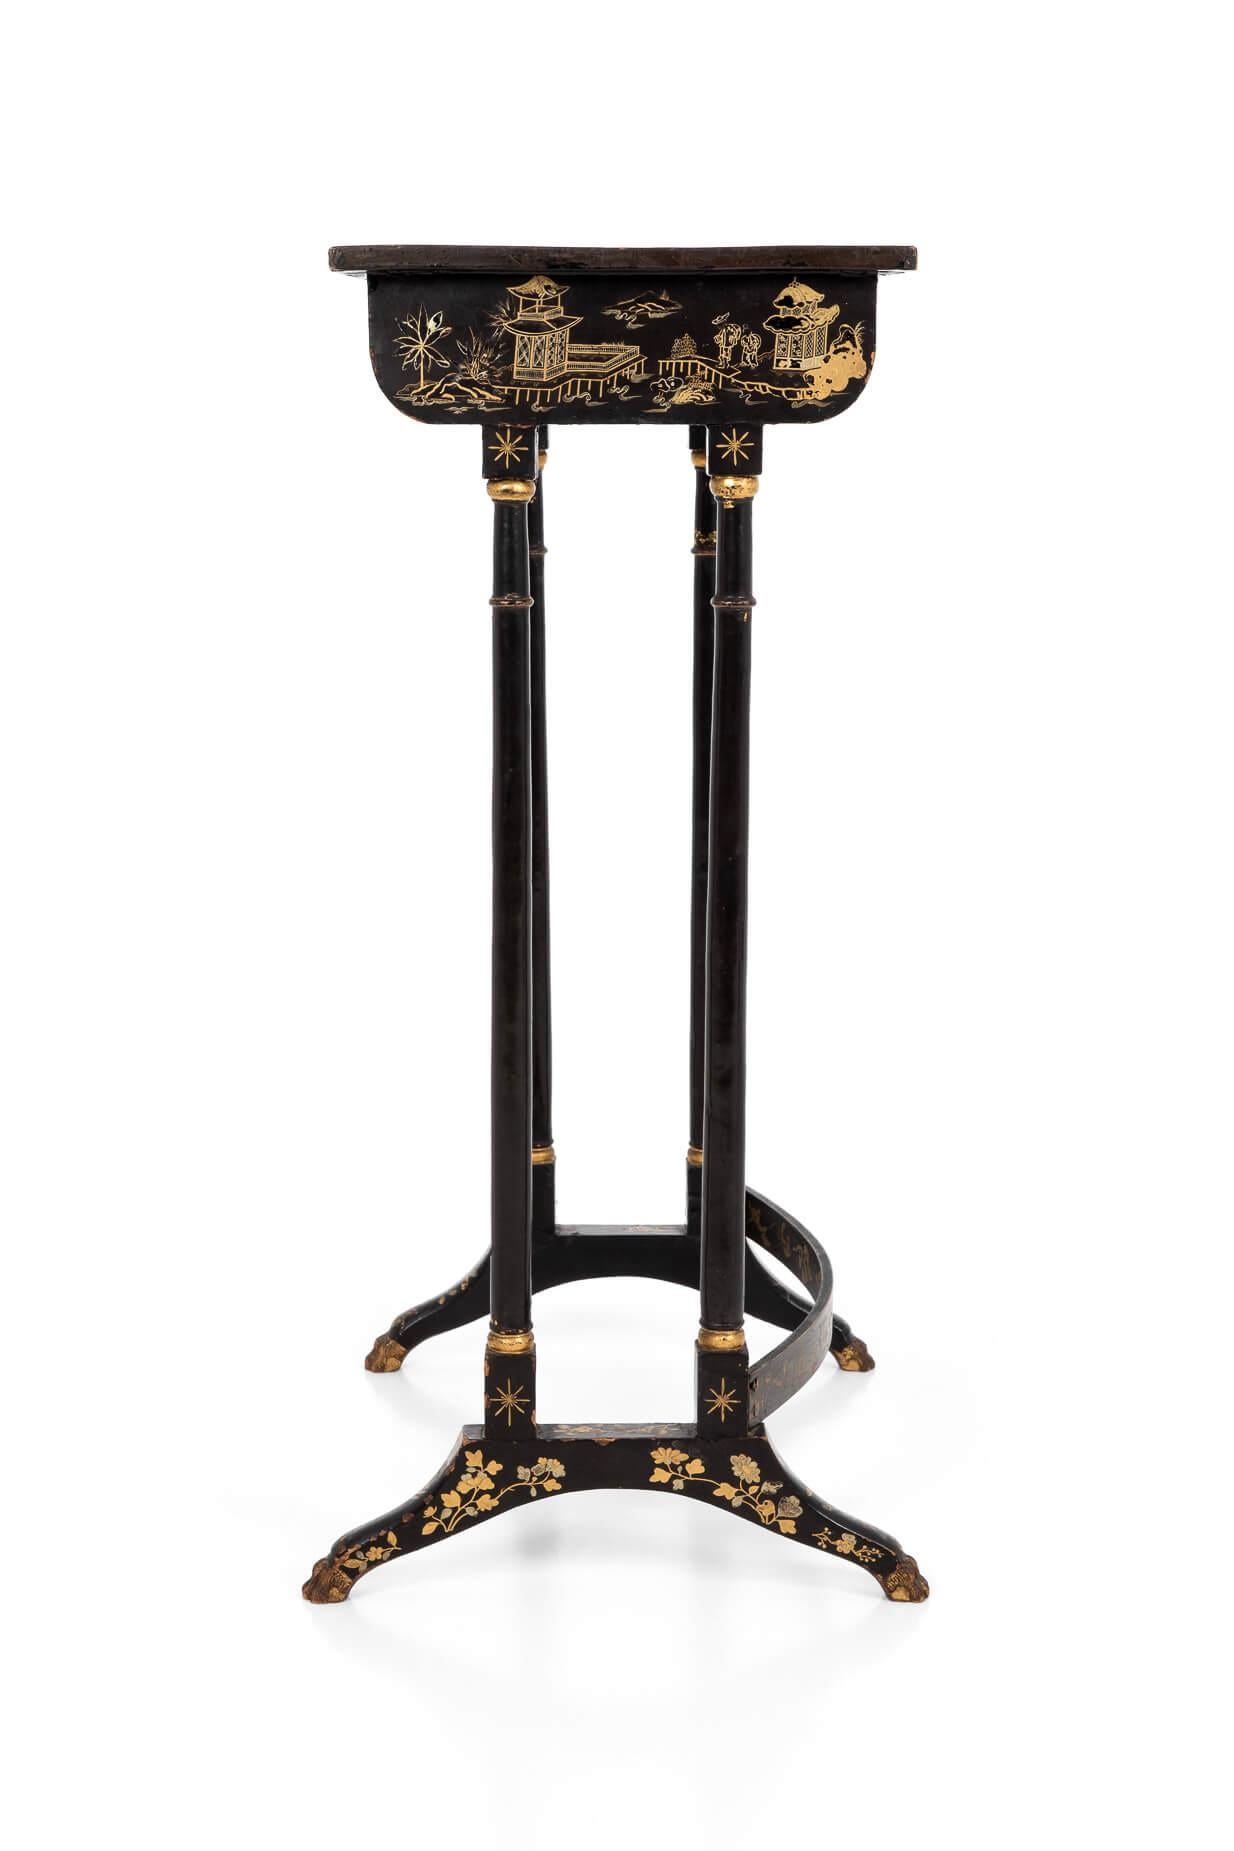 Nest of Three Regency Chinoiserie Gilt And Black Lacquer Tables, circa 1815 For Sale 4